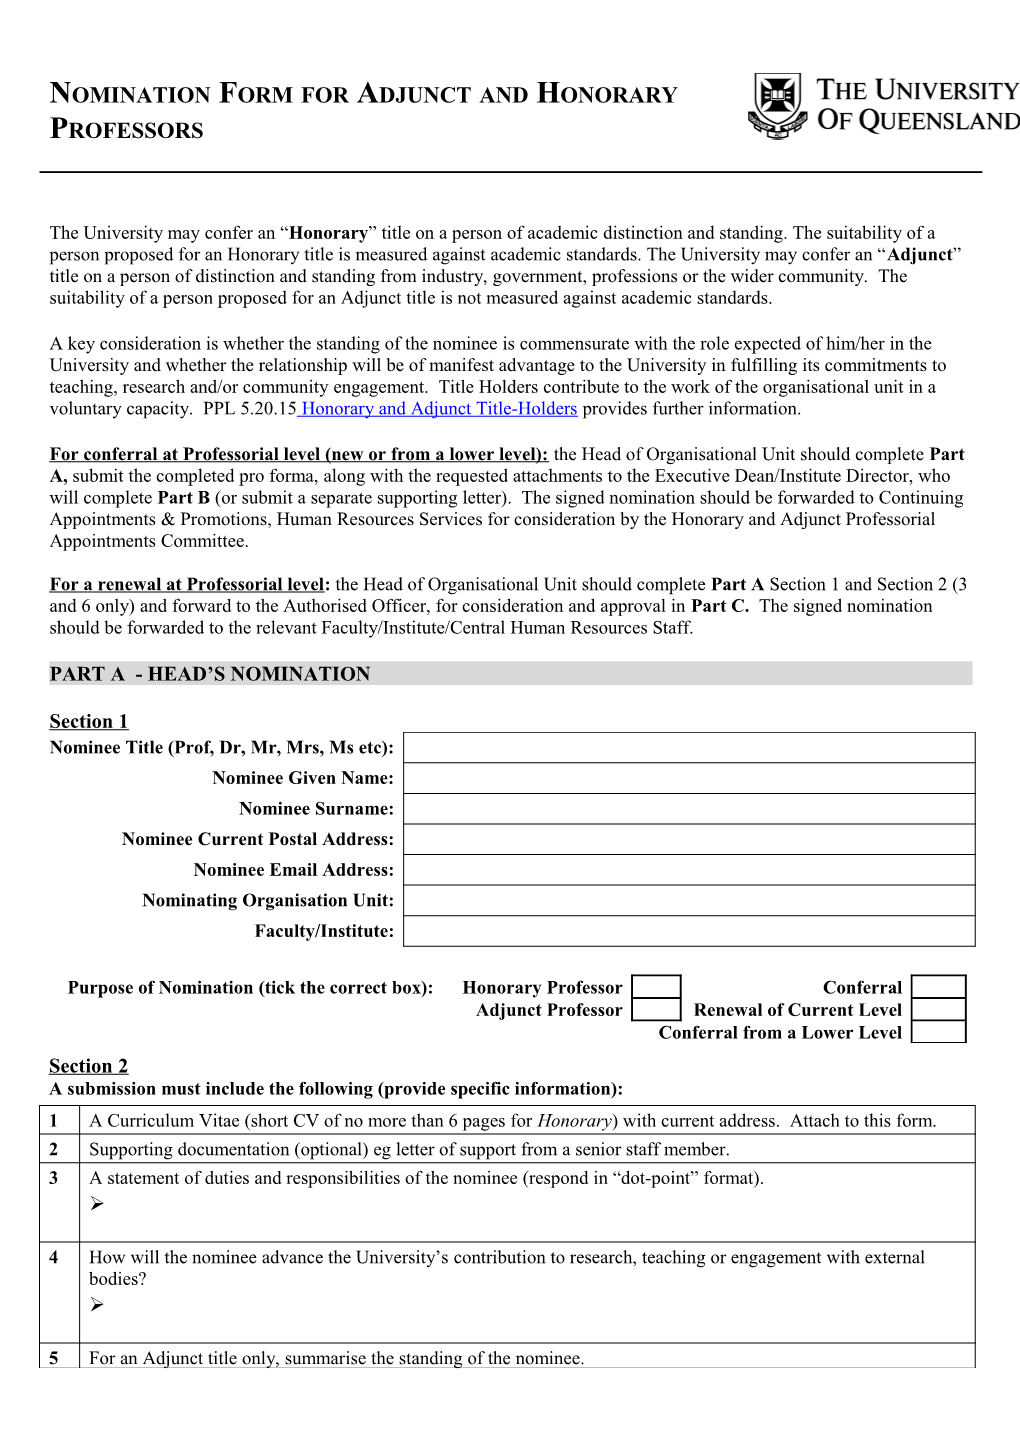 Nomination Form for Adjunct and Honorary Professors